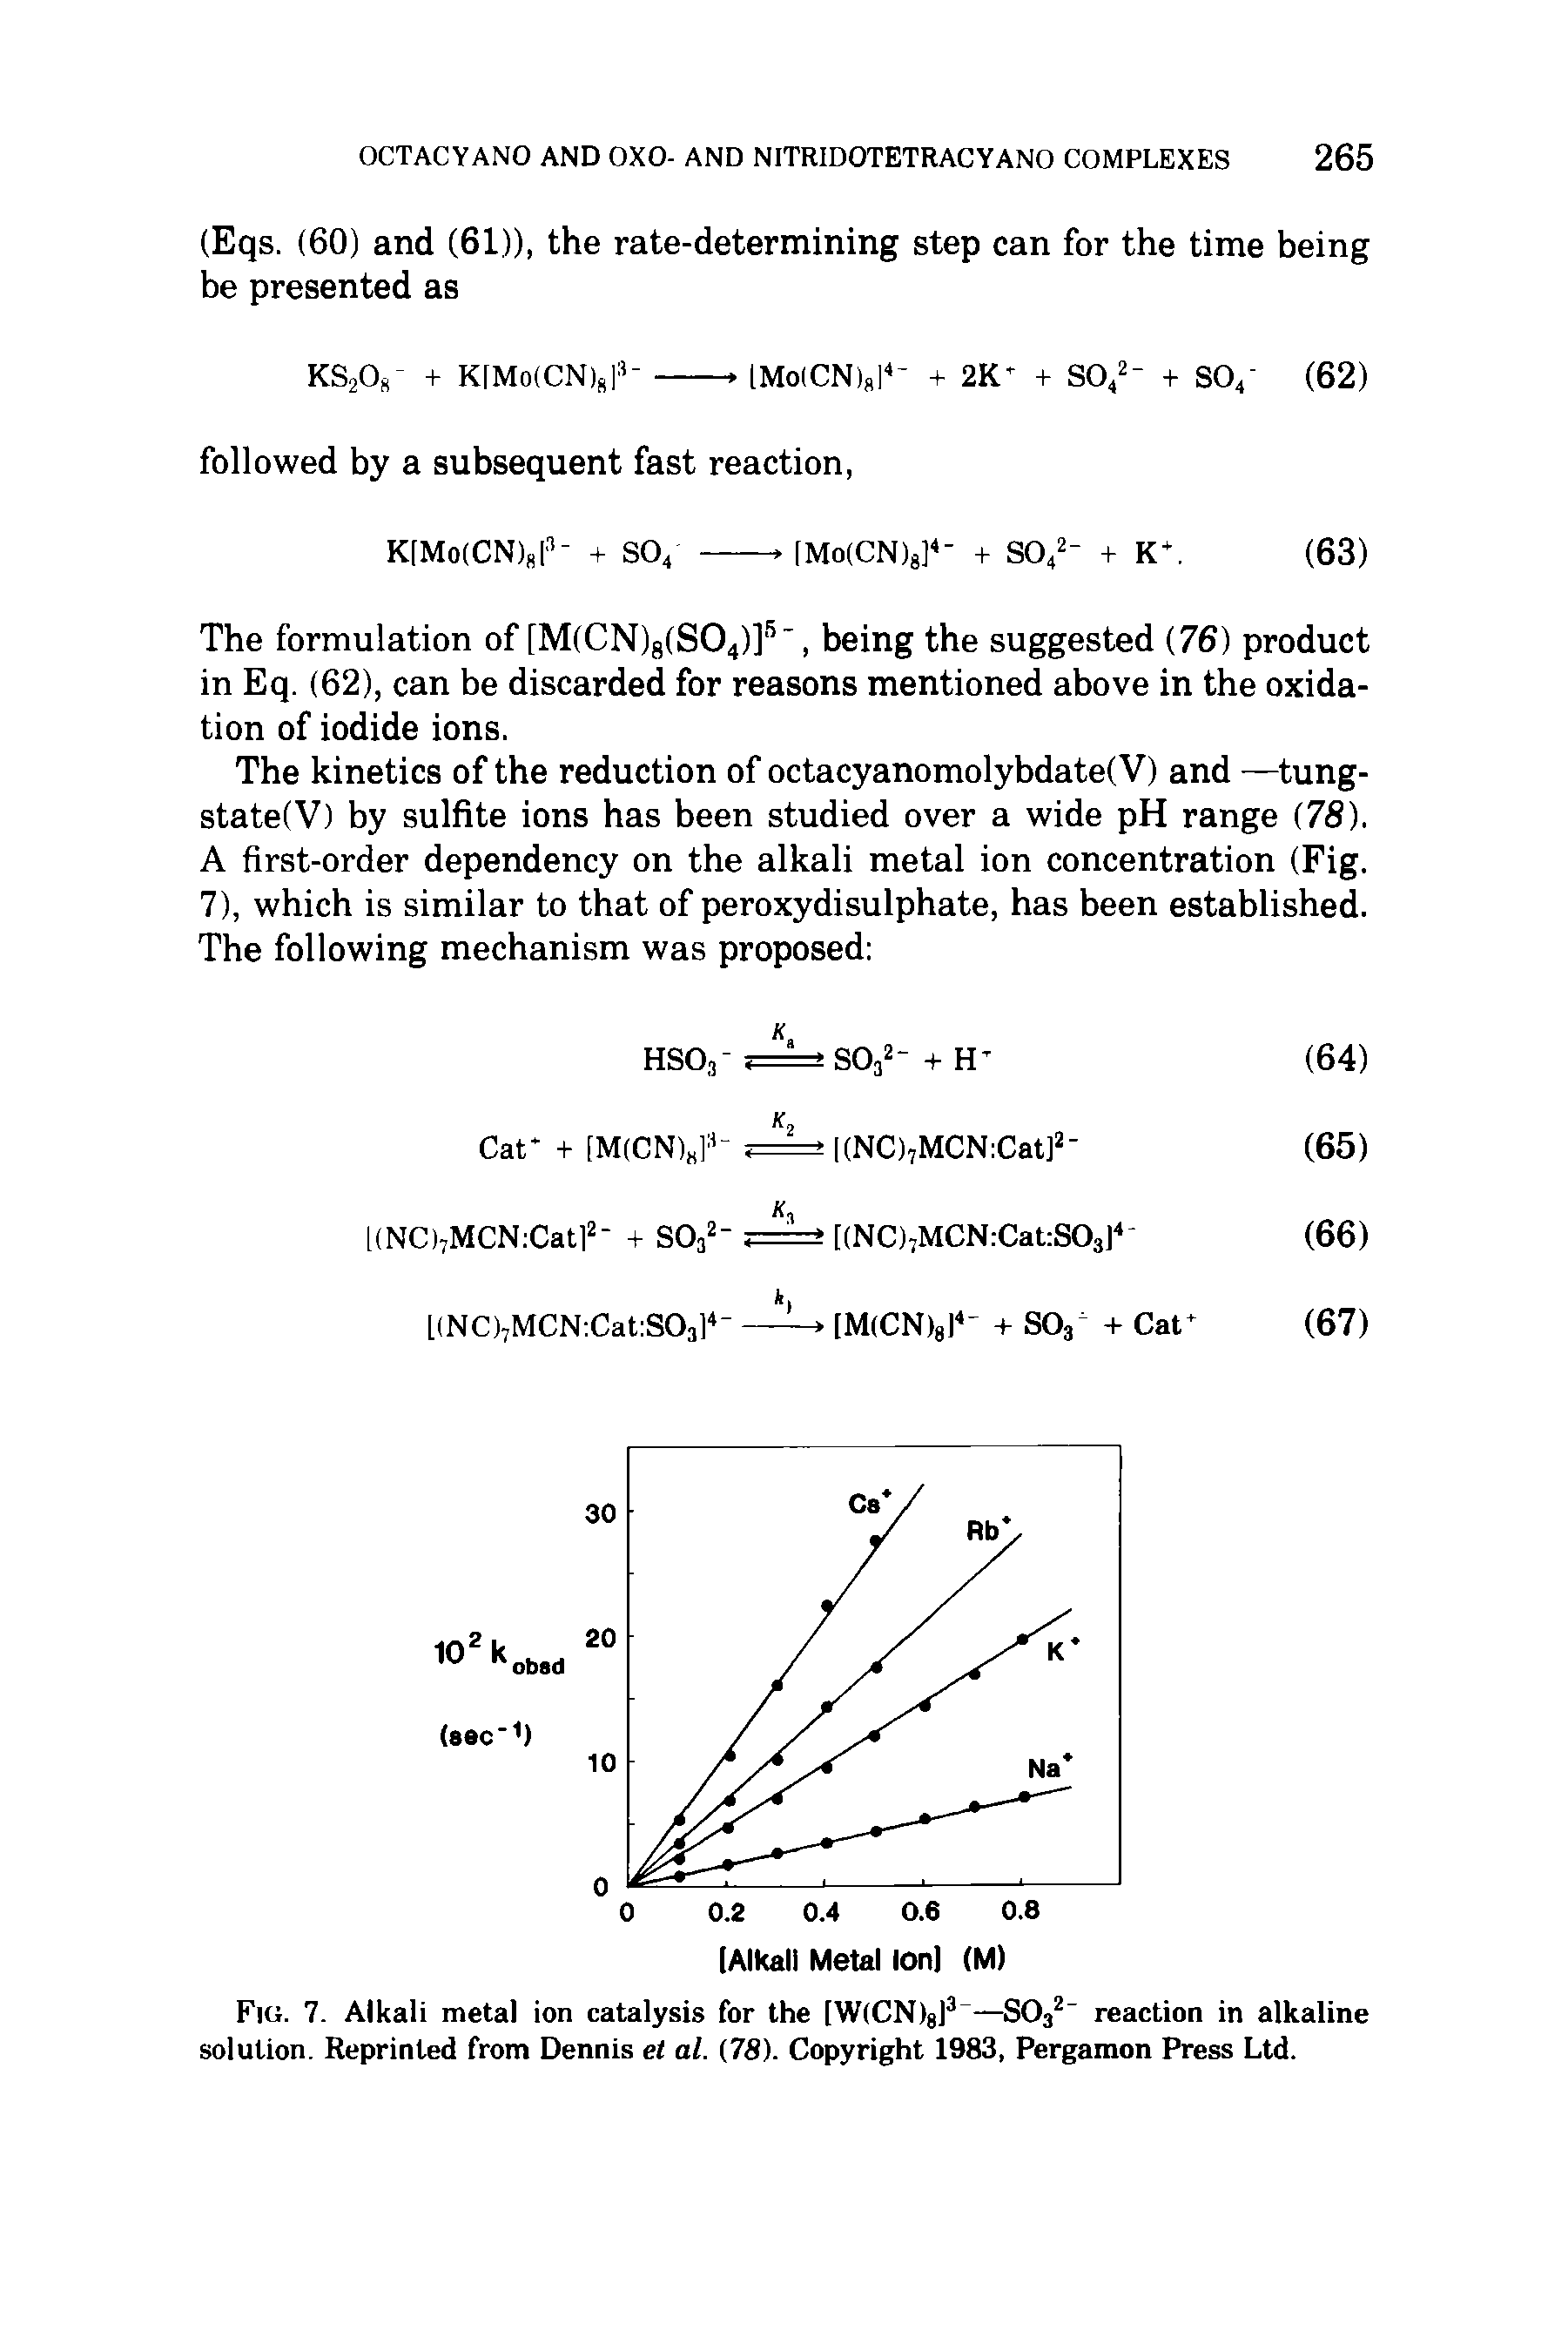 Fig. 7. Alkali metal ion catalysis for the [WiCNlg] —SOs reaction in alkaline solution. Reprinted from Dennis et al. (78). Copyright 1983, Pergamon Press Ltd.